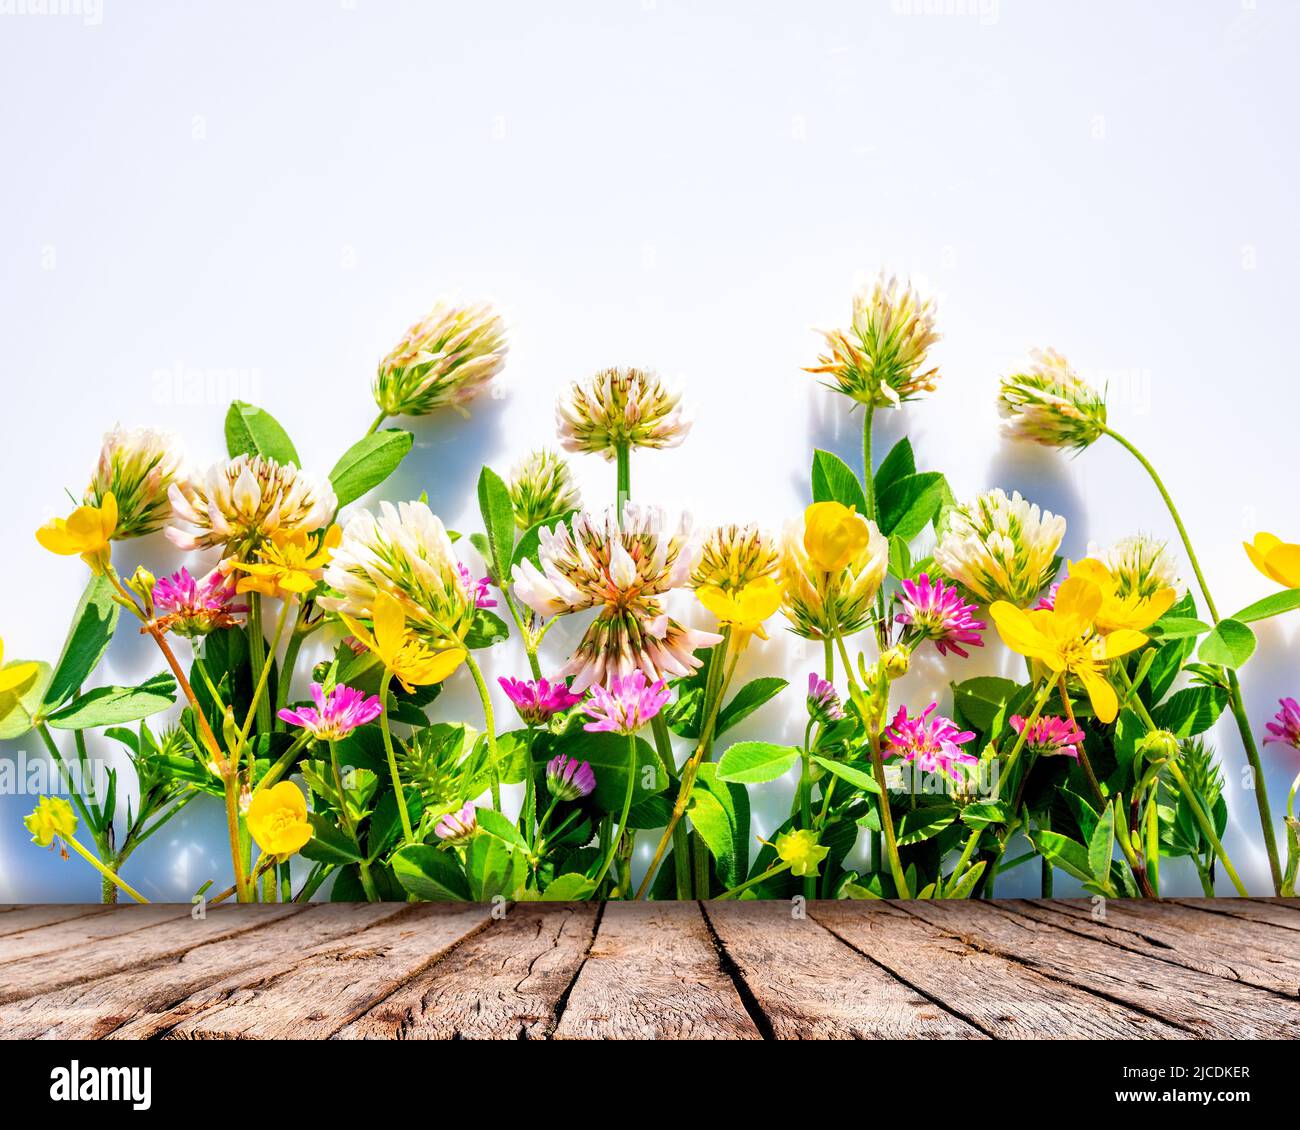 Wild flowers with old wooden table Stock Photo